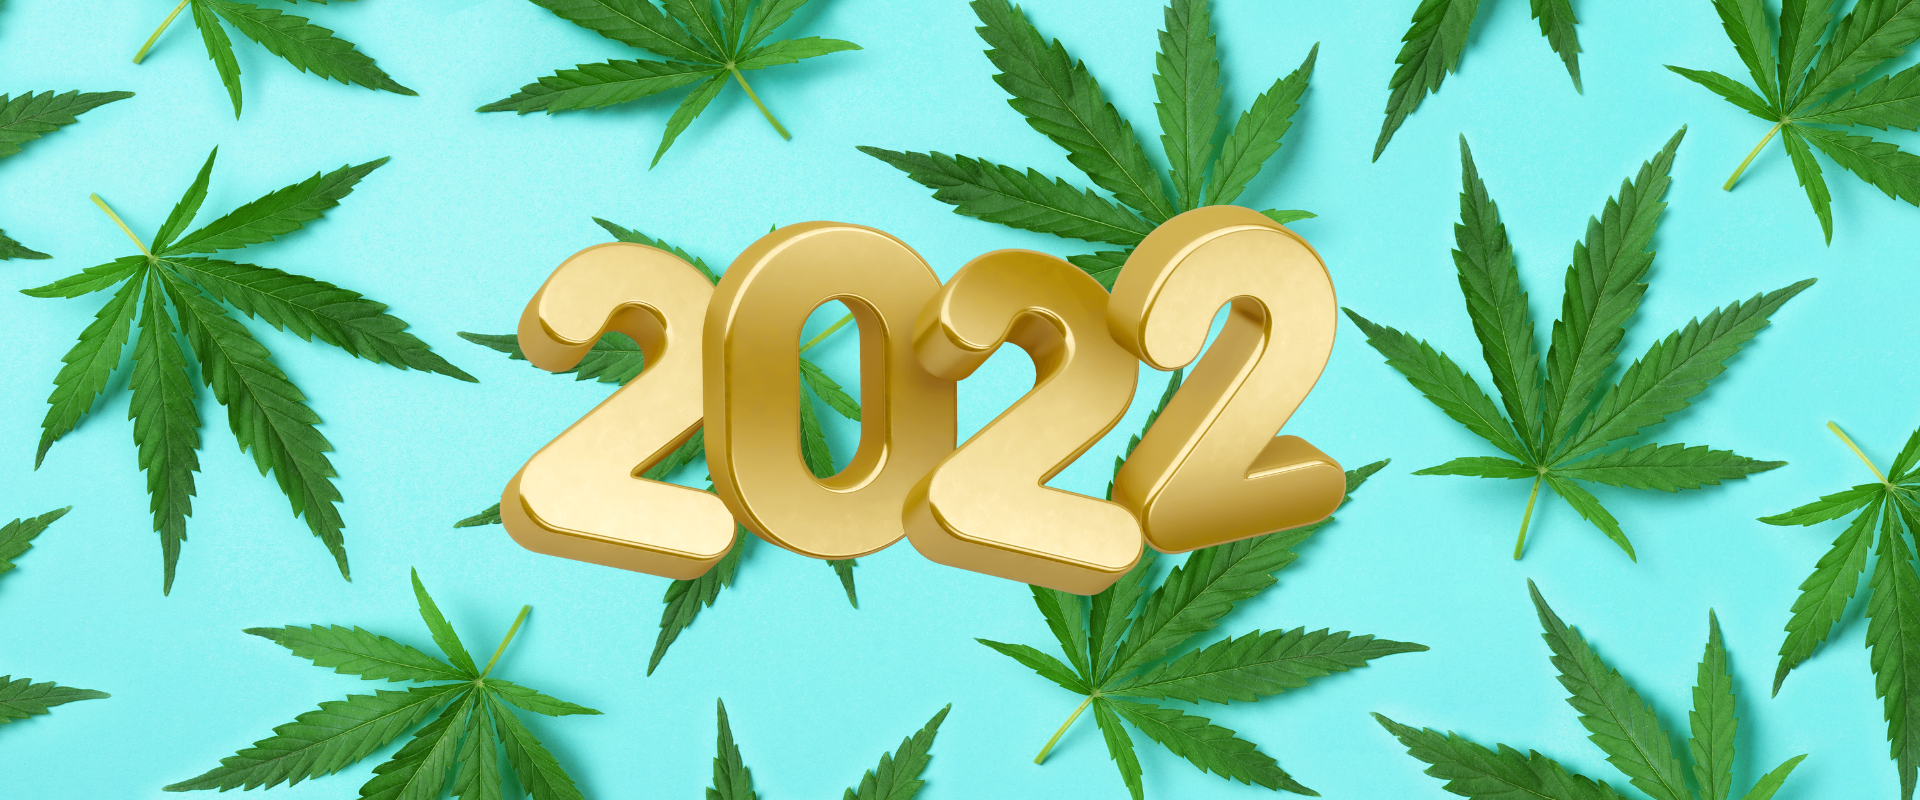 Ready, Set, Grow! The Best Weed Strains 2022